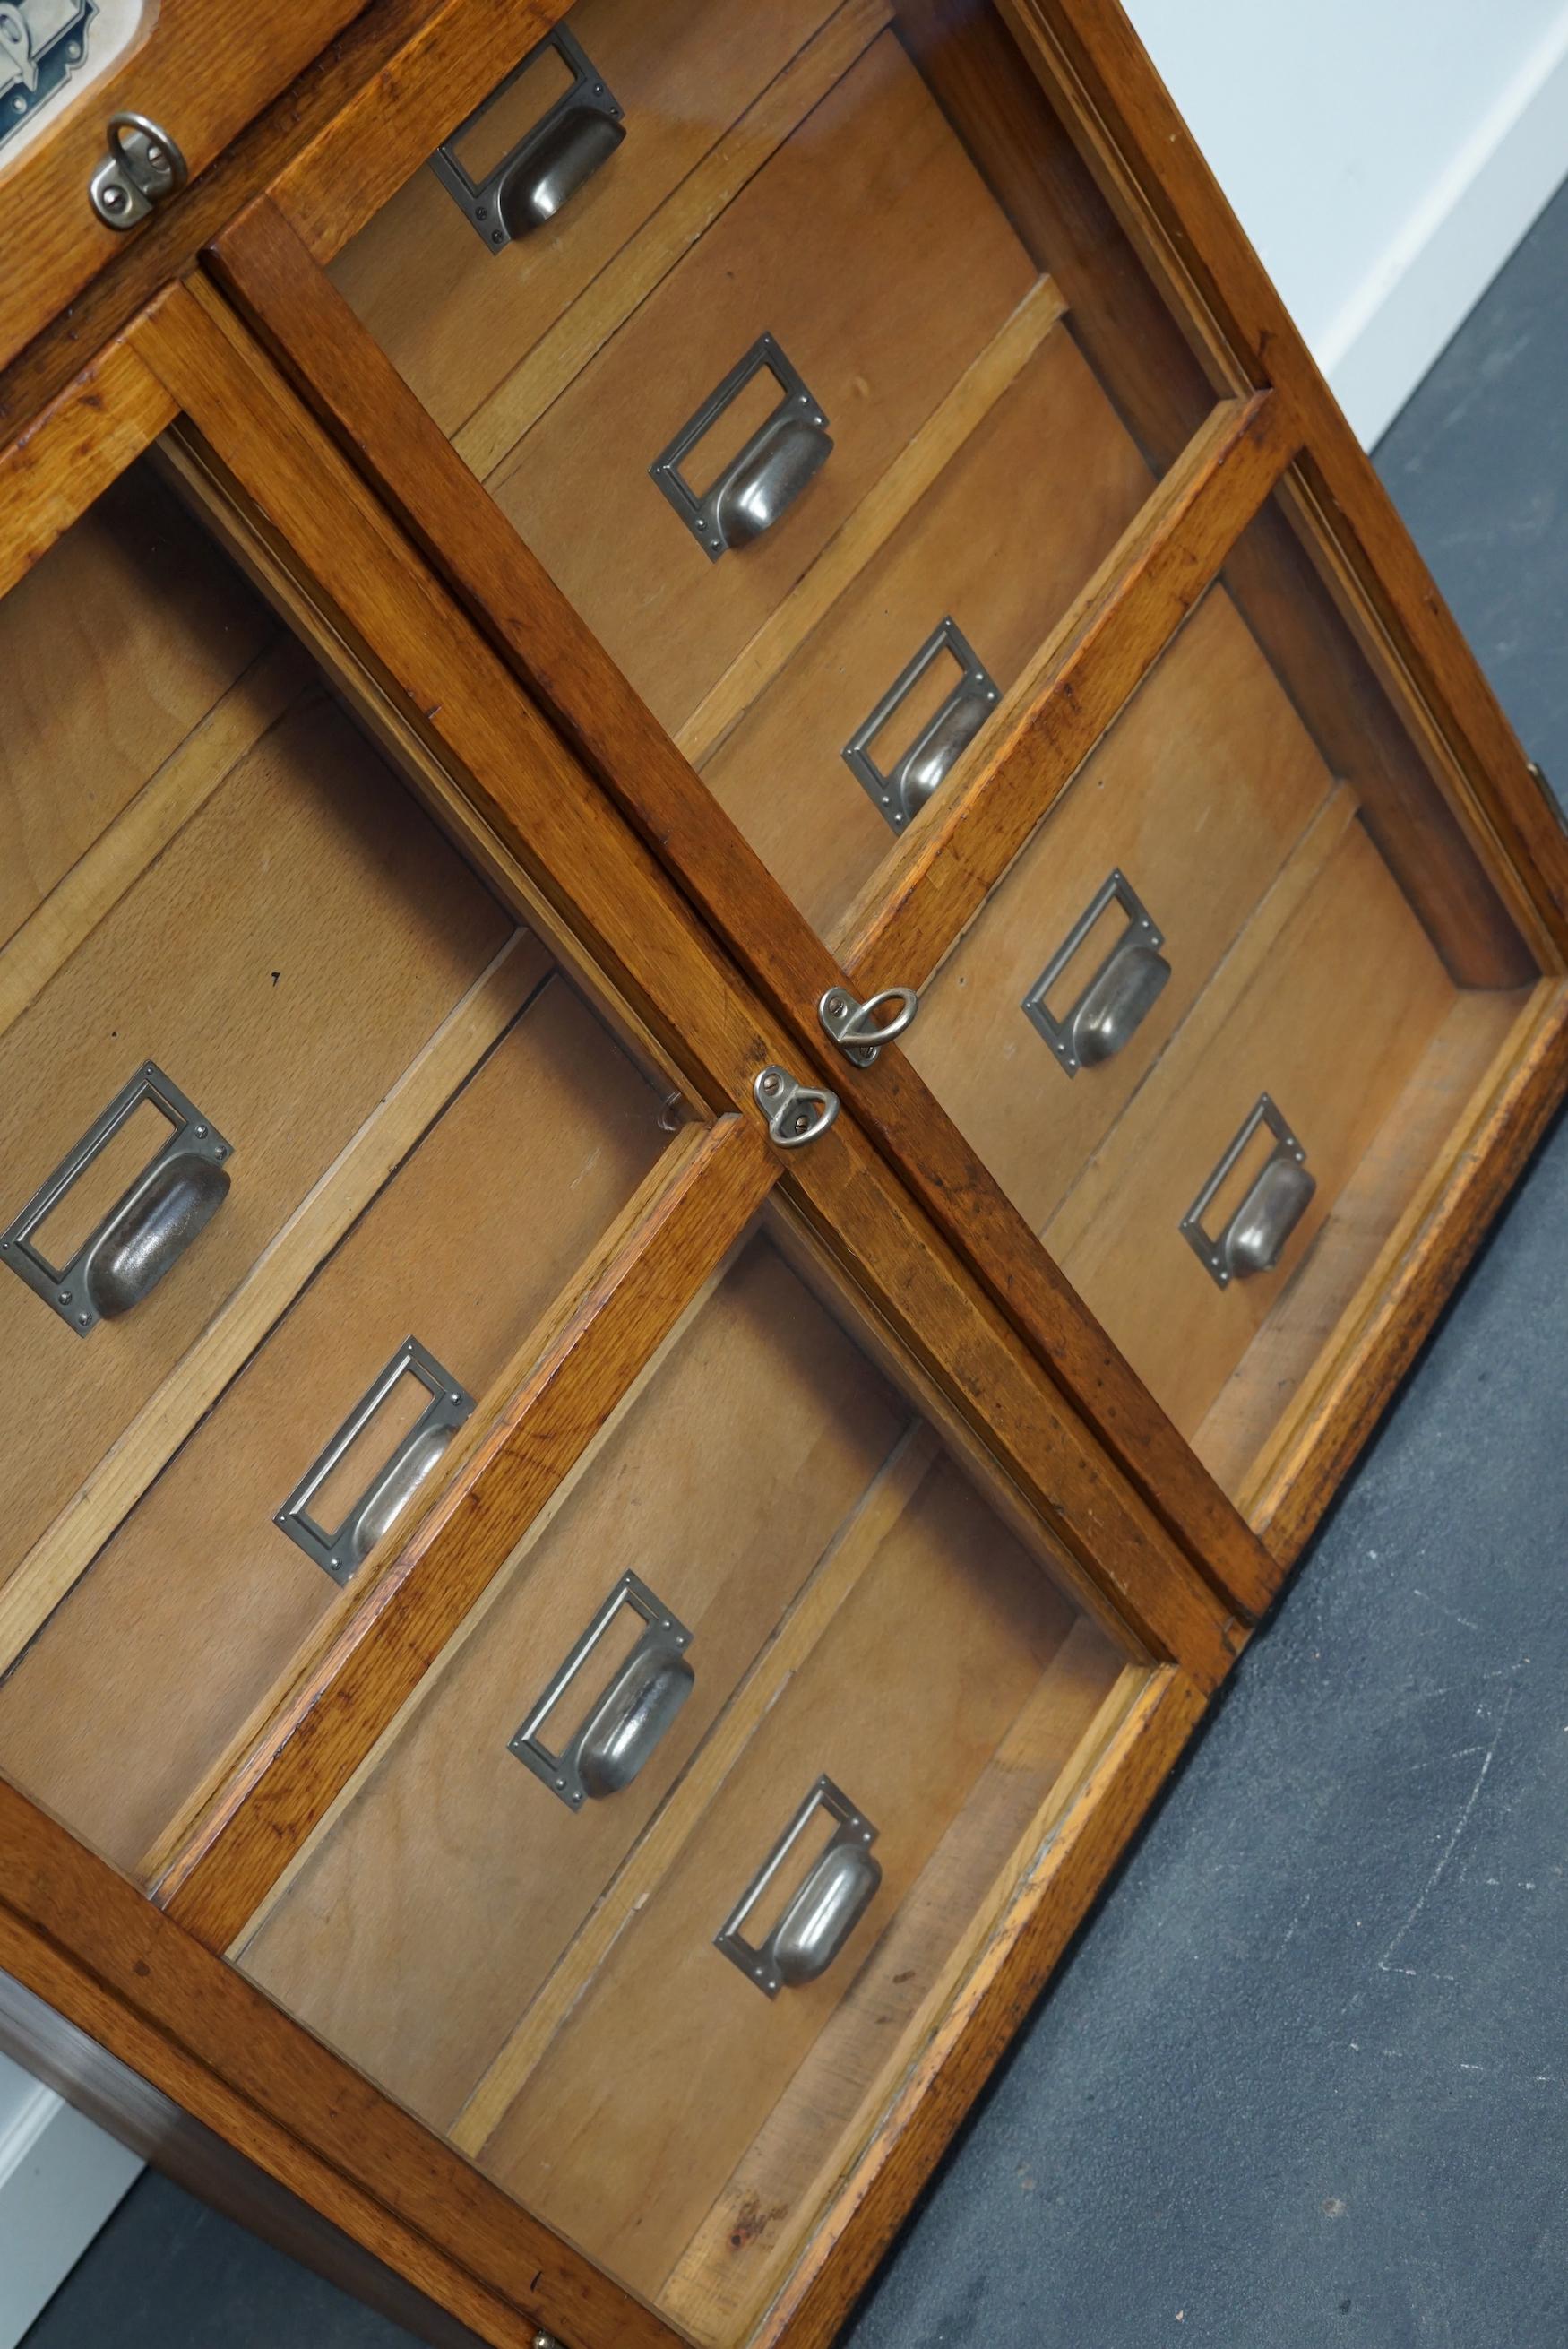 apothecary cabinet for sale